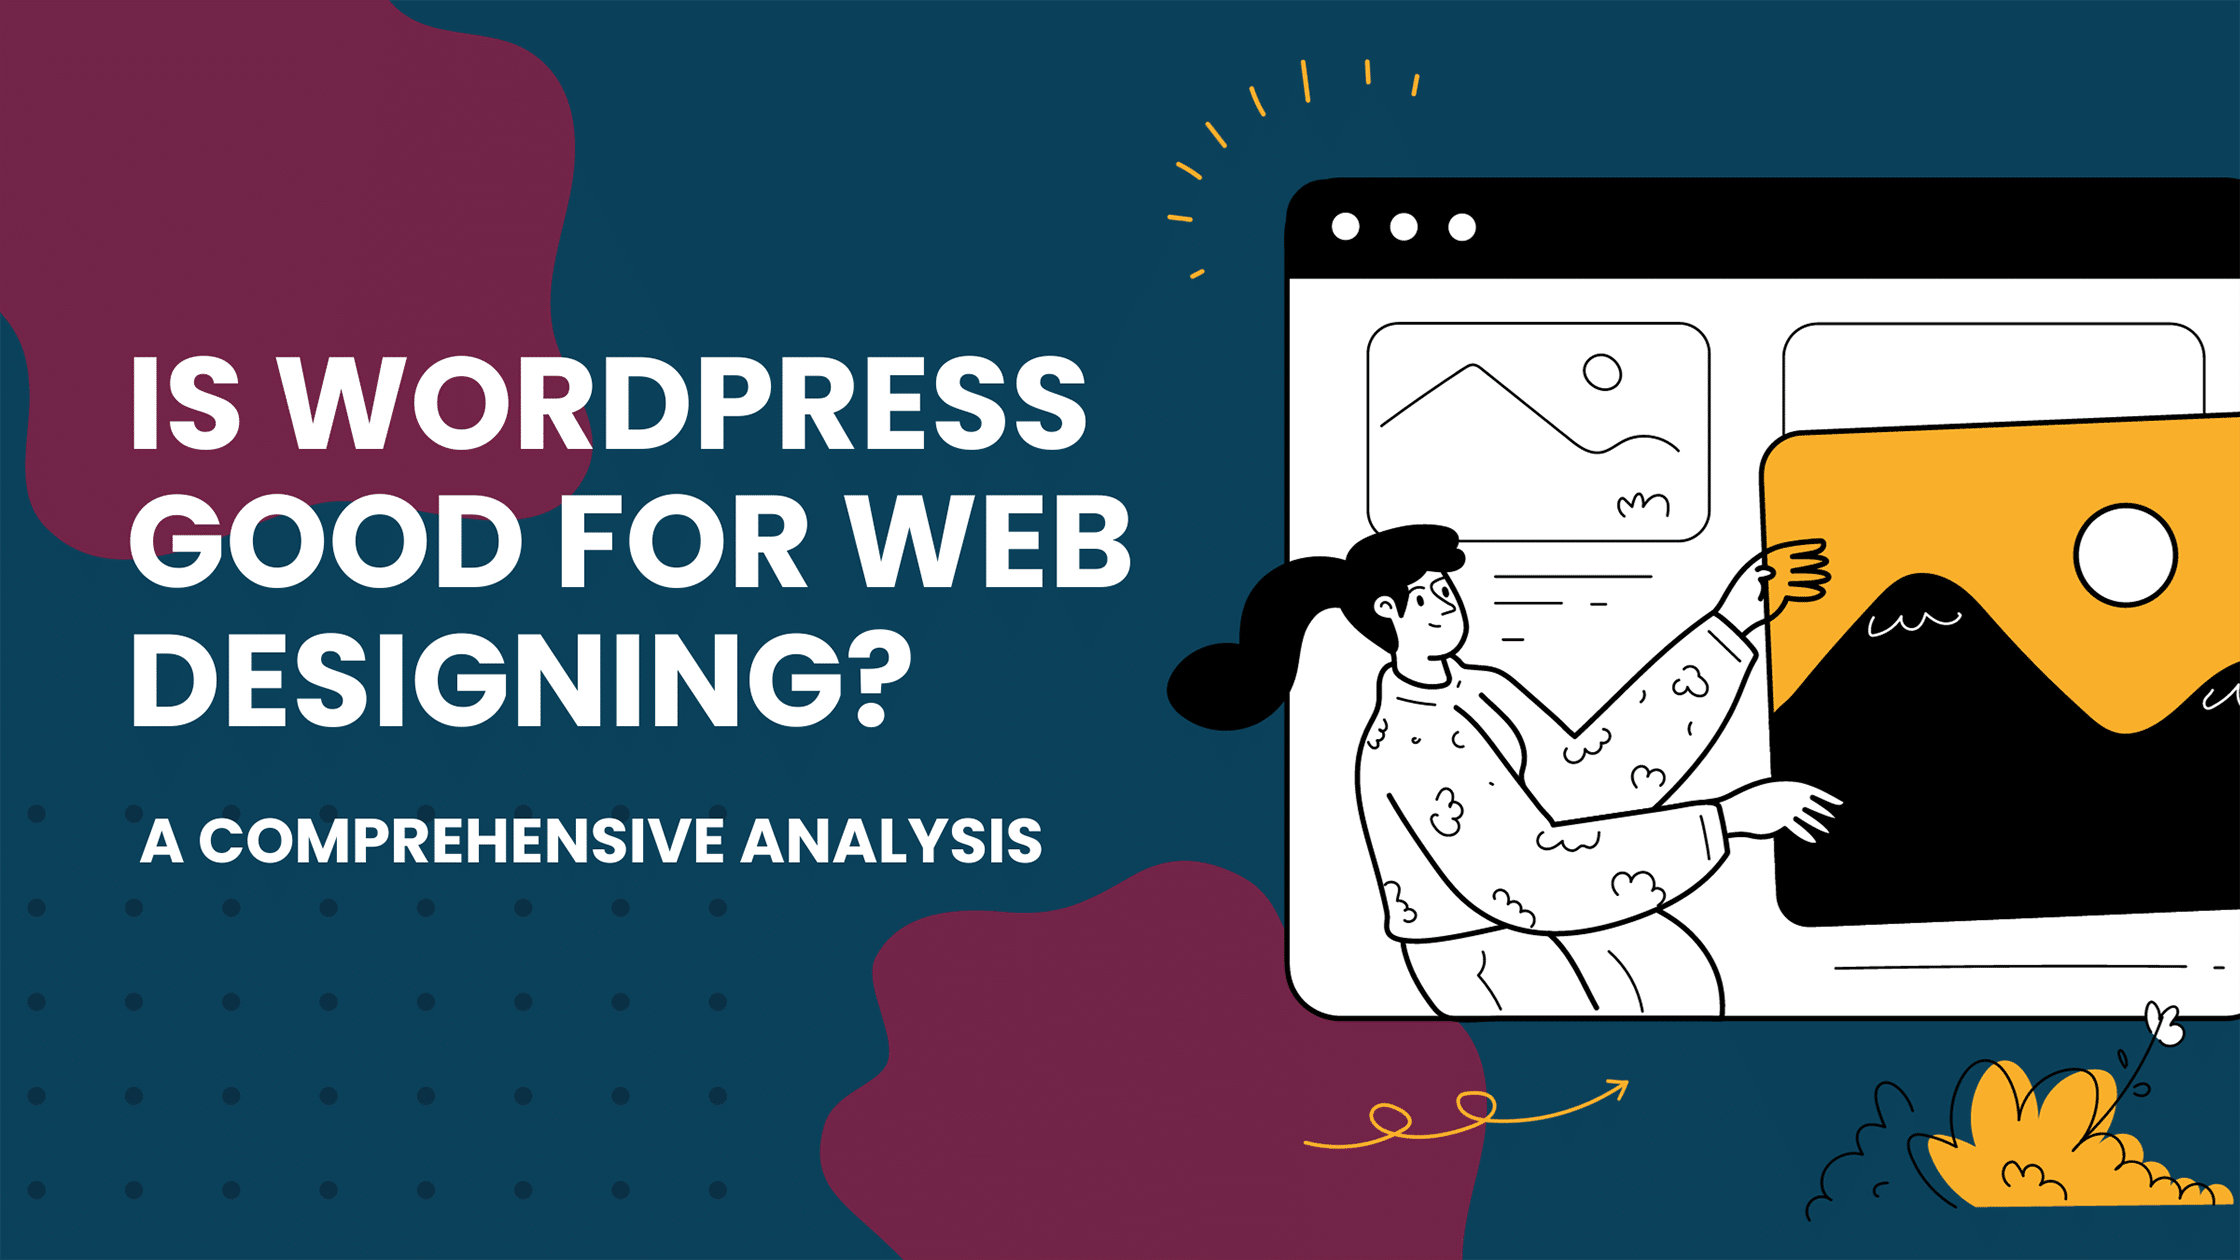 An illustrated image depicting a person interacting with a graphical representation of a website. Text asks, "Is WordPress good for web designing?"